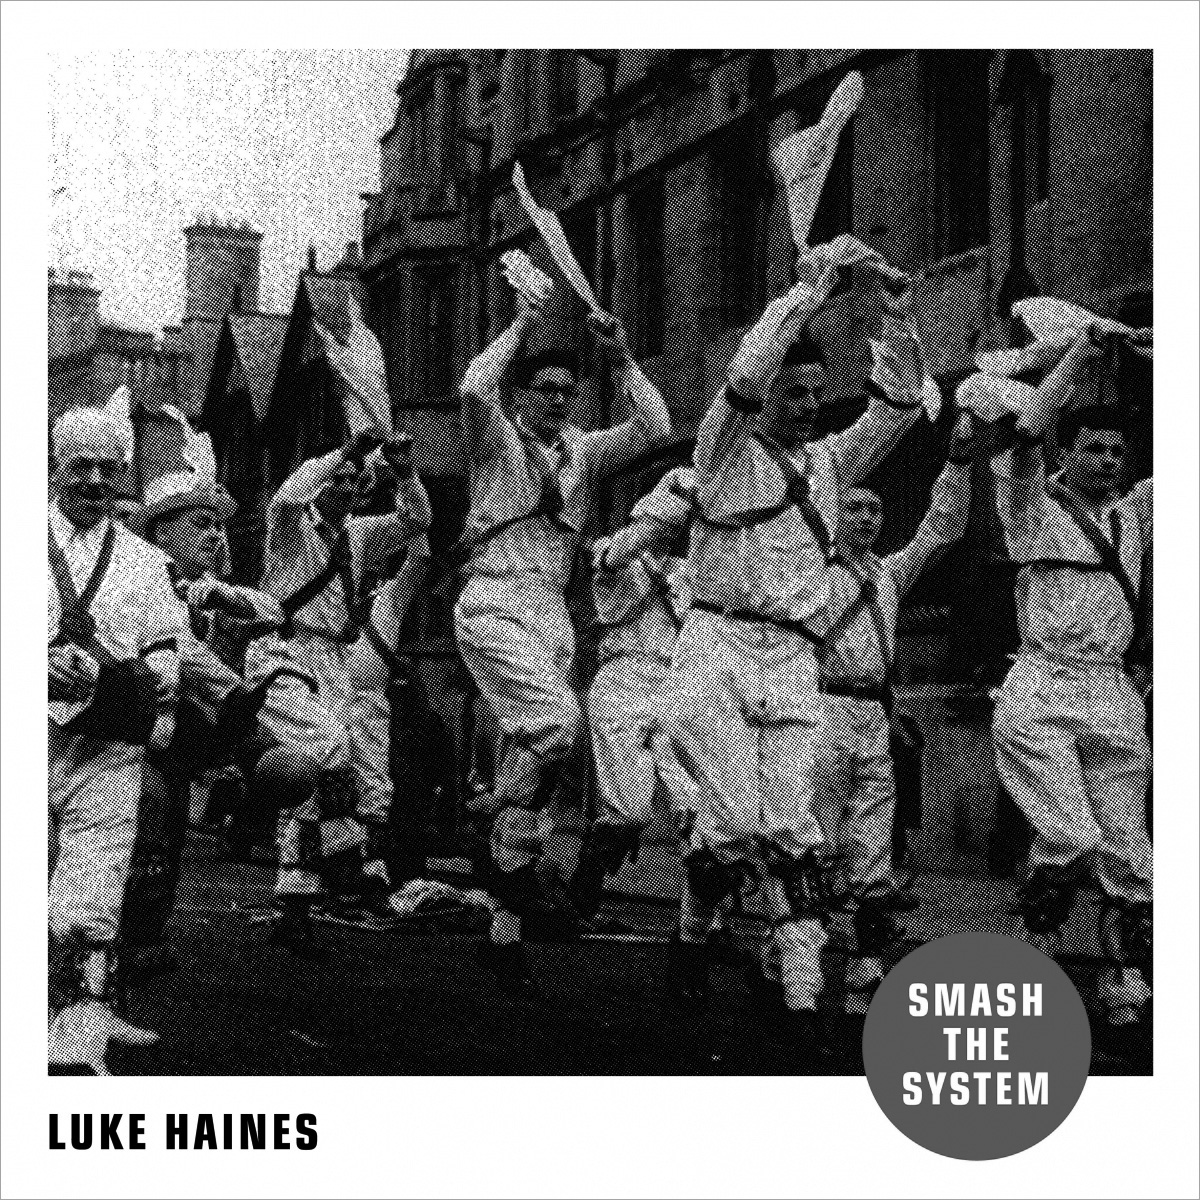 luke-haines-smash-the-system-album-morris-dancers-a-year-in-the-country-stroke-1